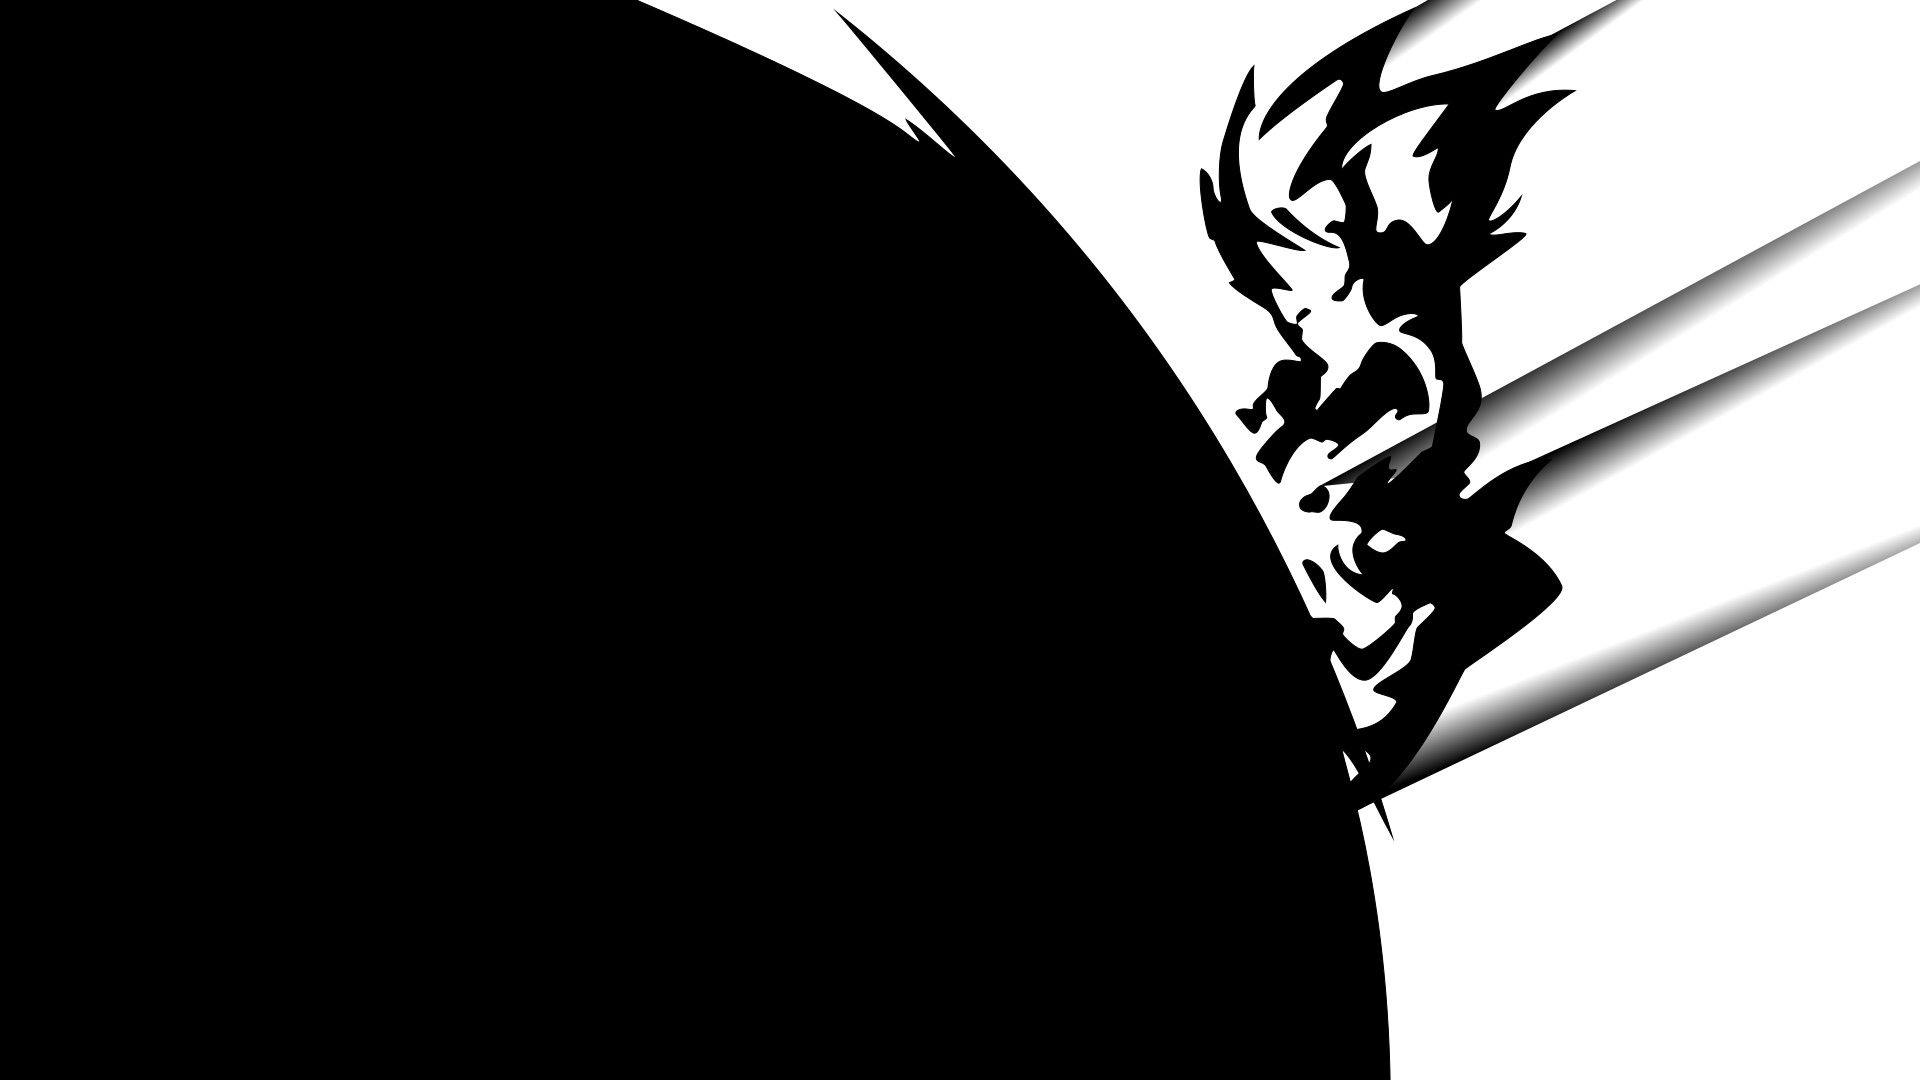 Black and white drawing of anime character Goku 2K wallpaper download